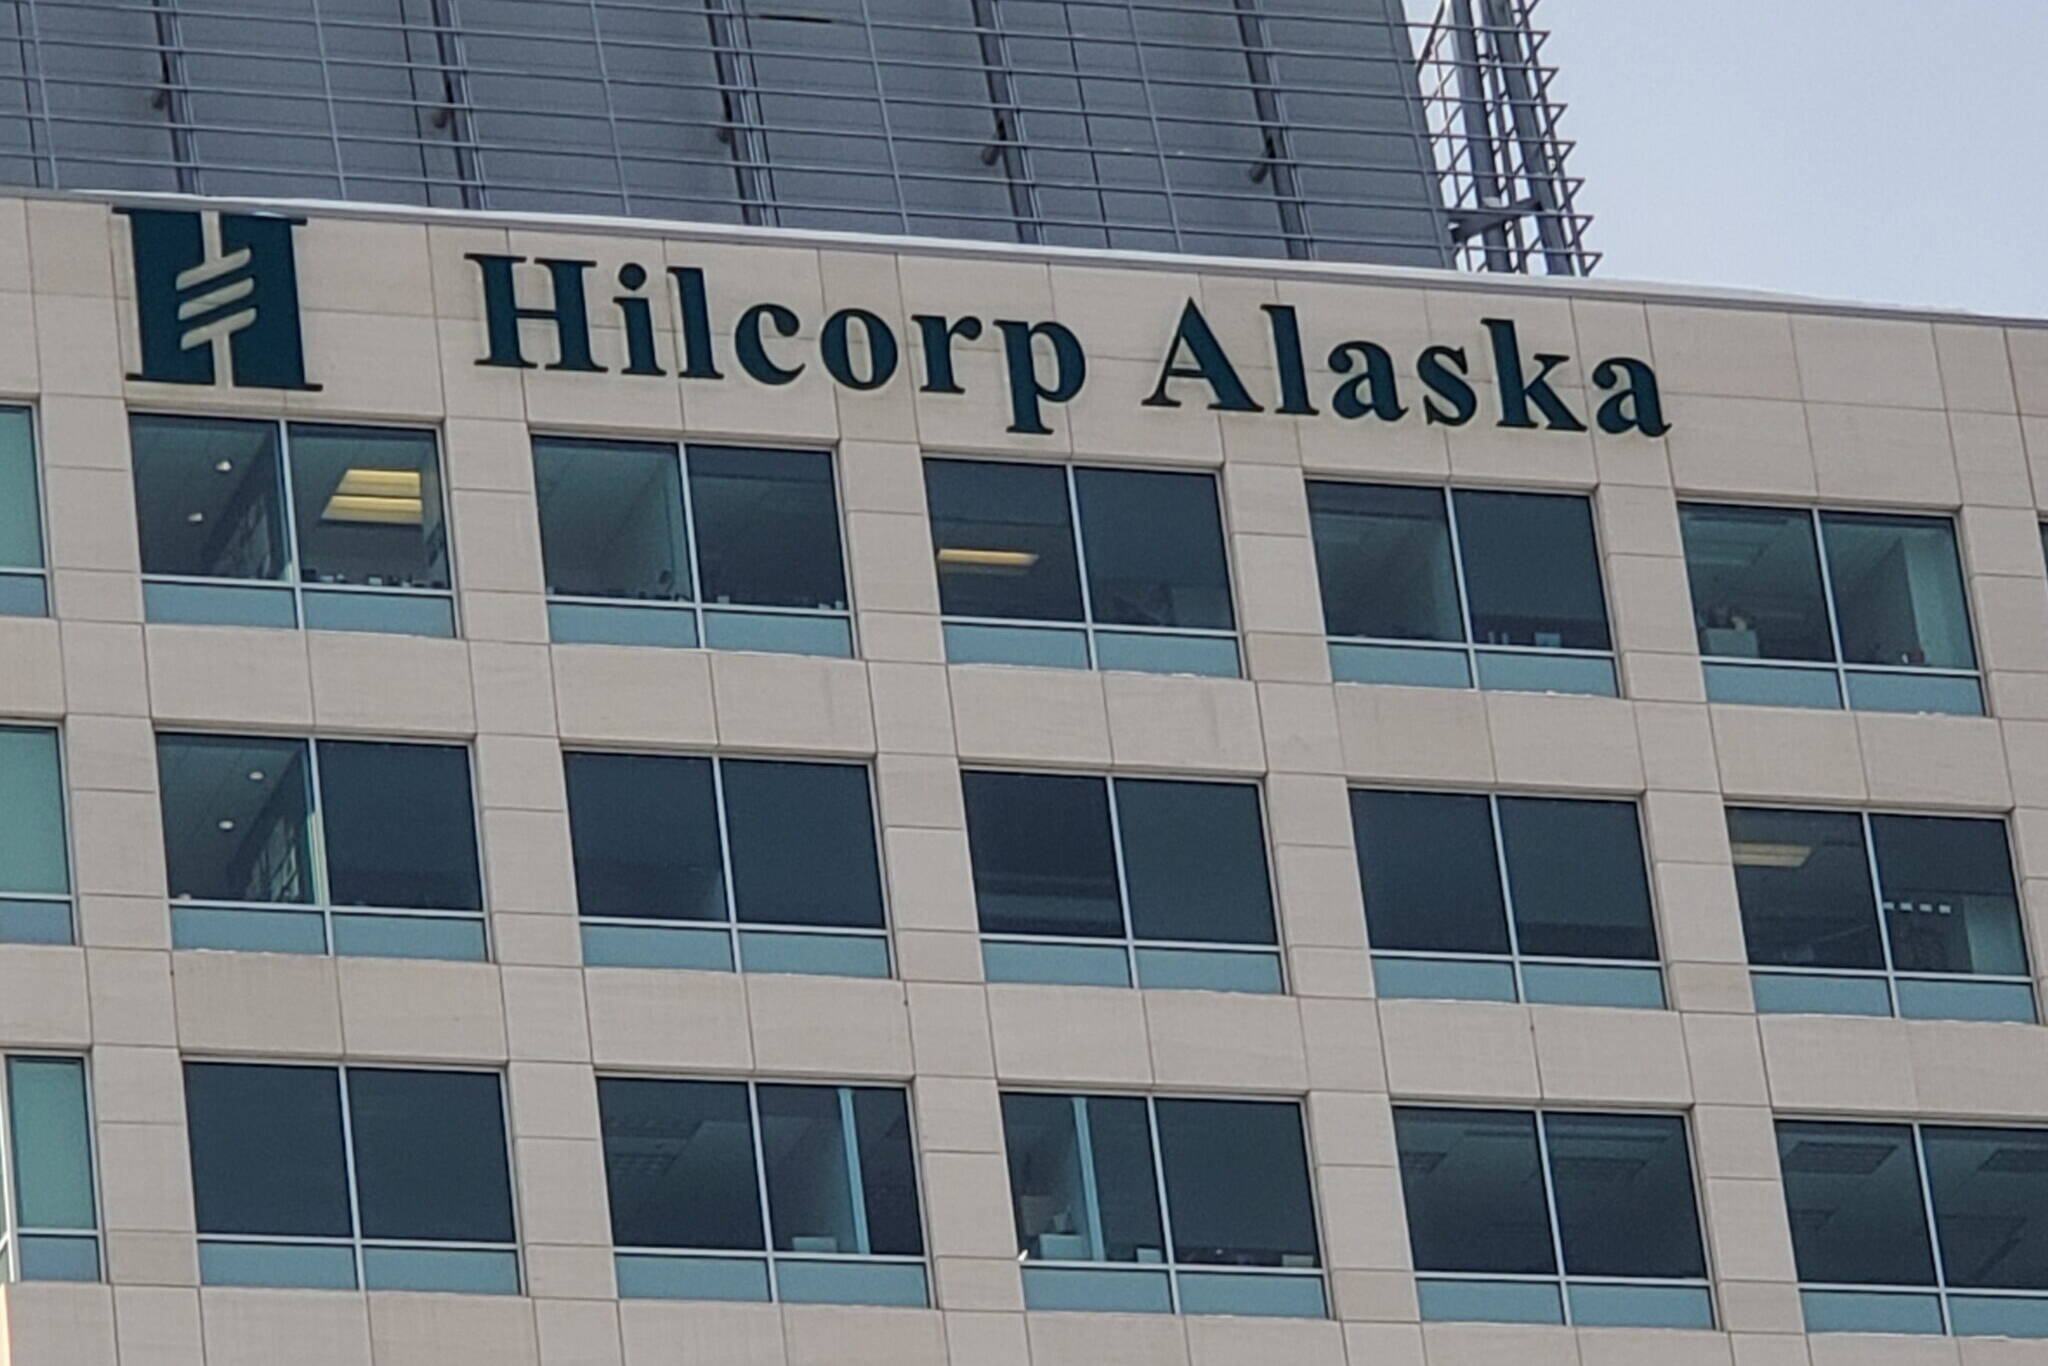 Hilcorp’s Alaska headquarters in Midtown Anchorage are seen on Feb. 7. The company, now a dominant operator in Alaska, announced it has struck a deal to expand its North Slope holdings by buying Eni’s Alaska assets. (Yereth Rosen/Alaska Beacon)